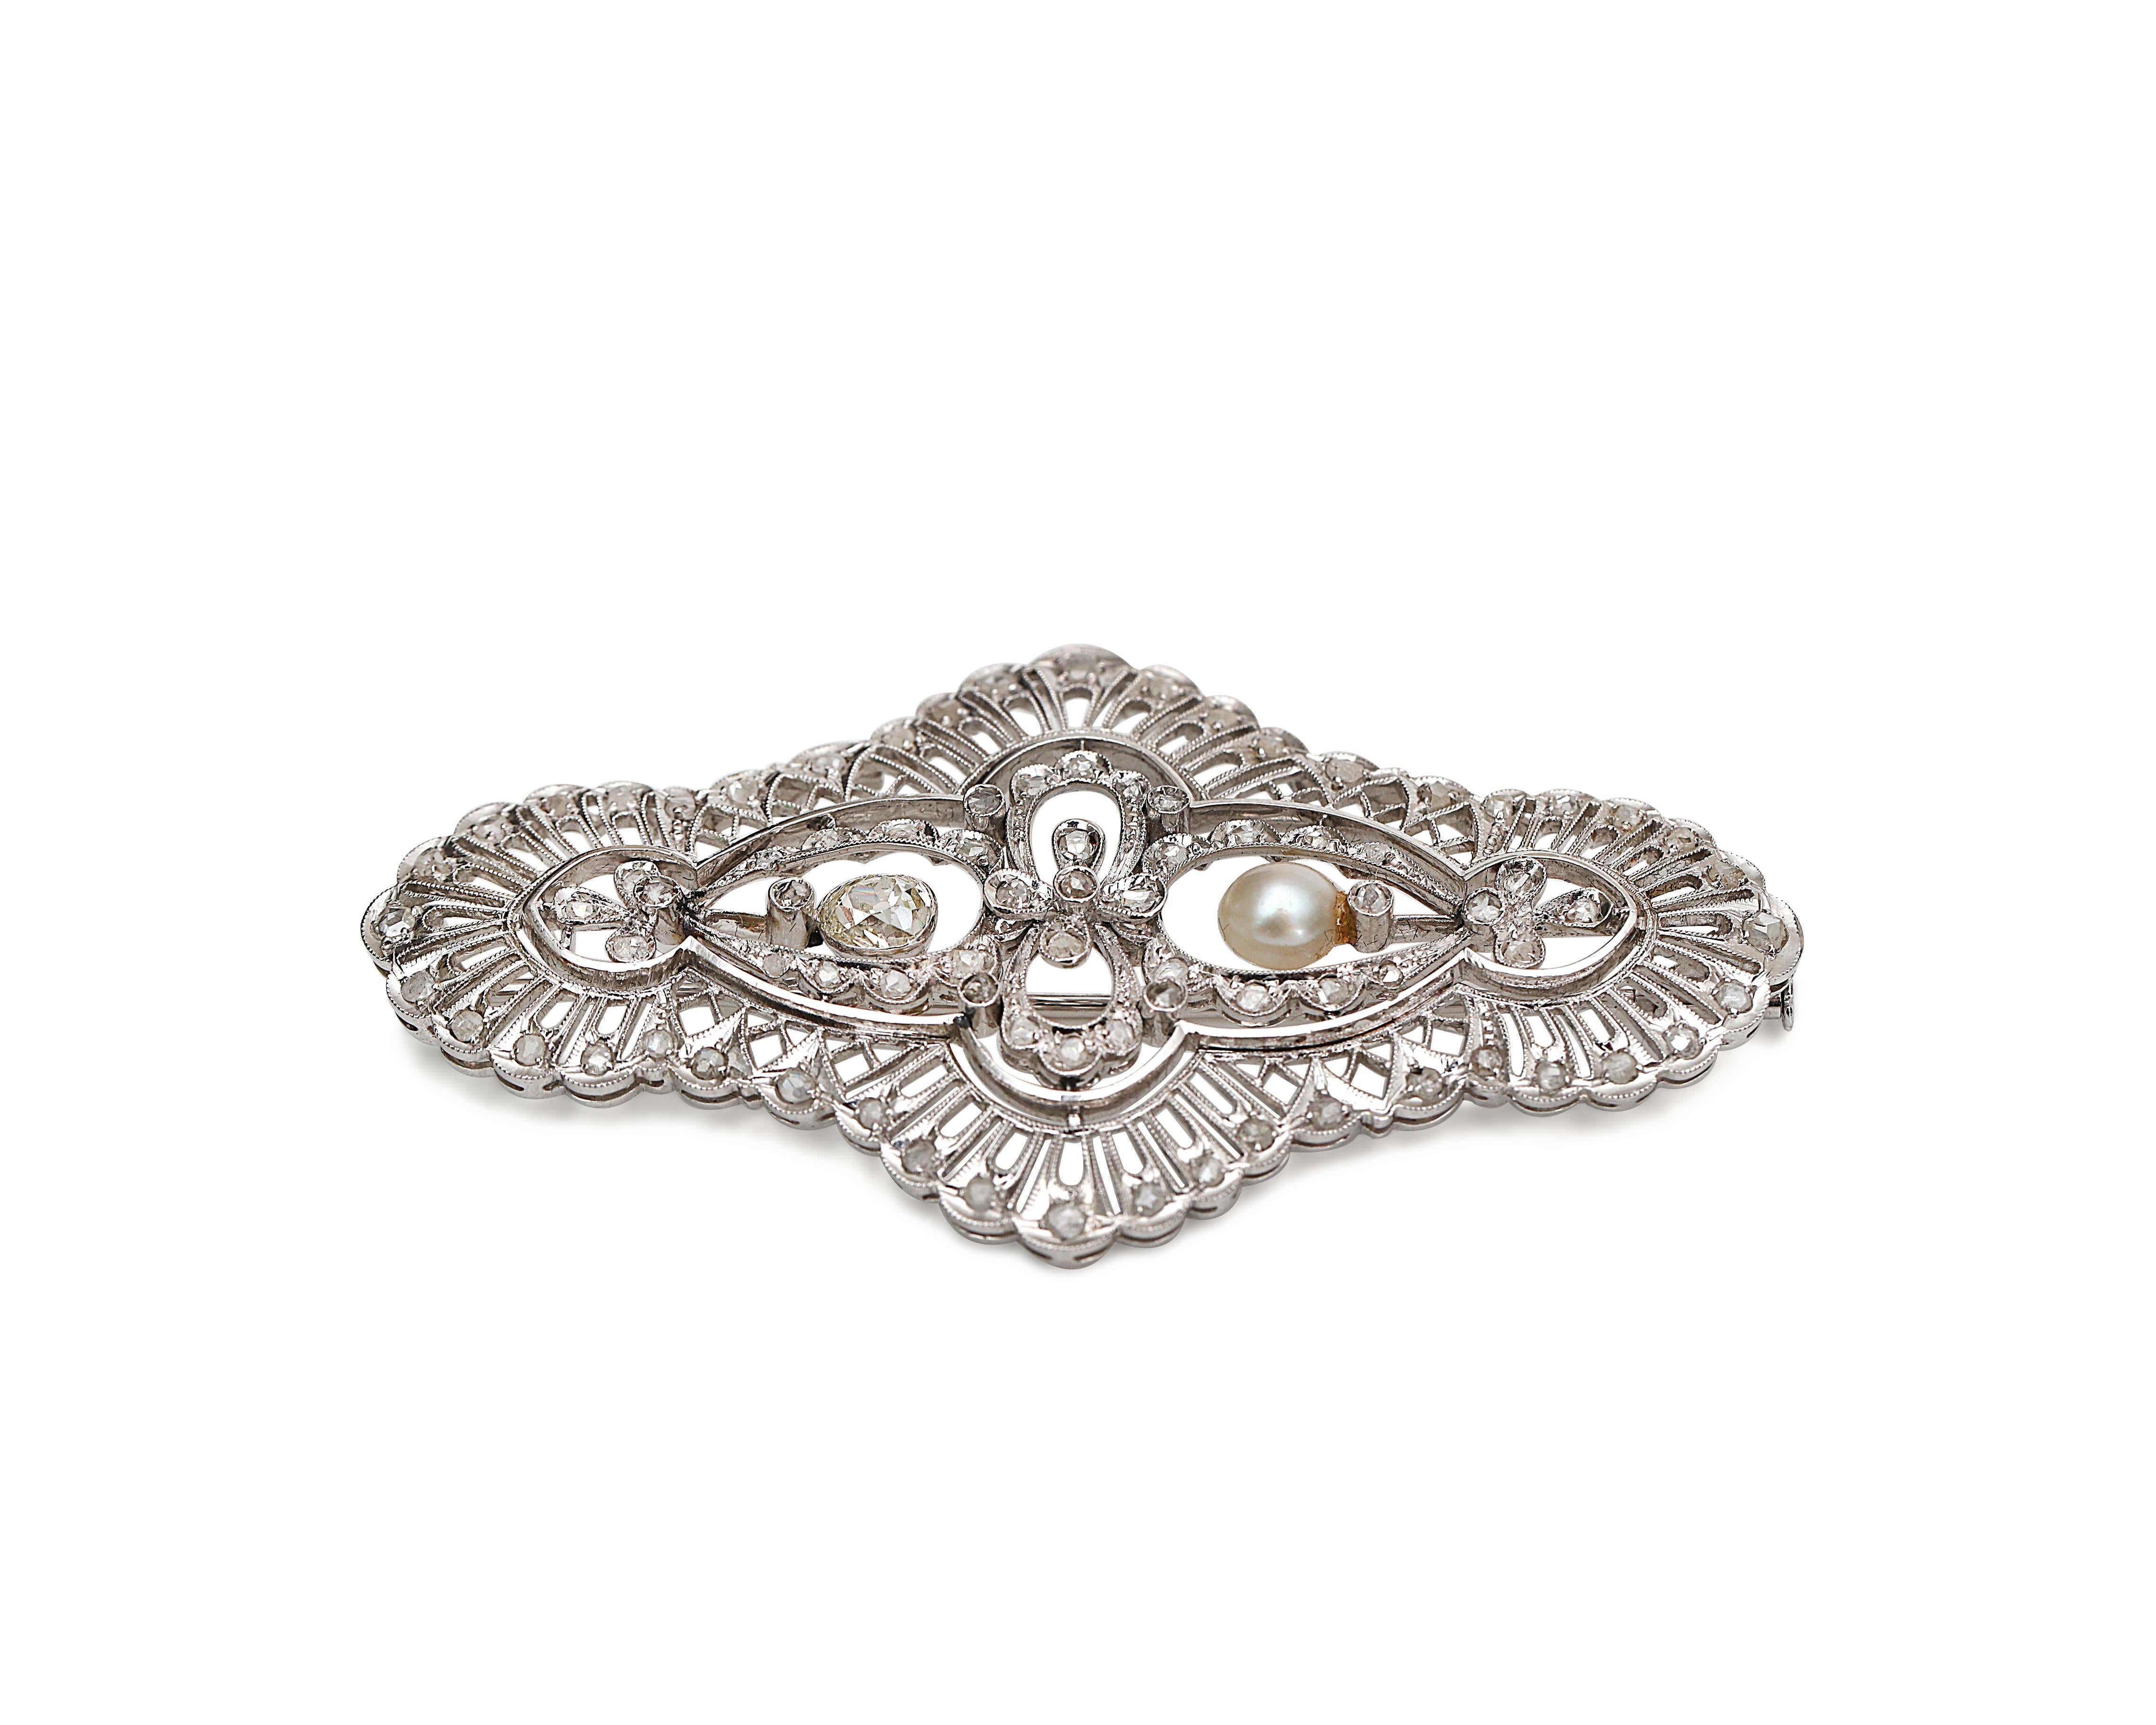 Women's Victorian 18K Gold Filigree Brooch with Old Mine and Rose Cut Diamond and Pearl